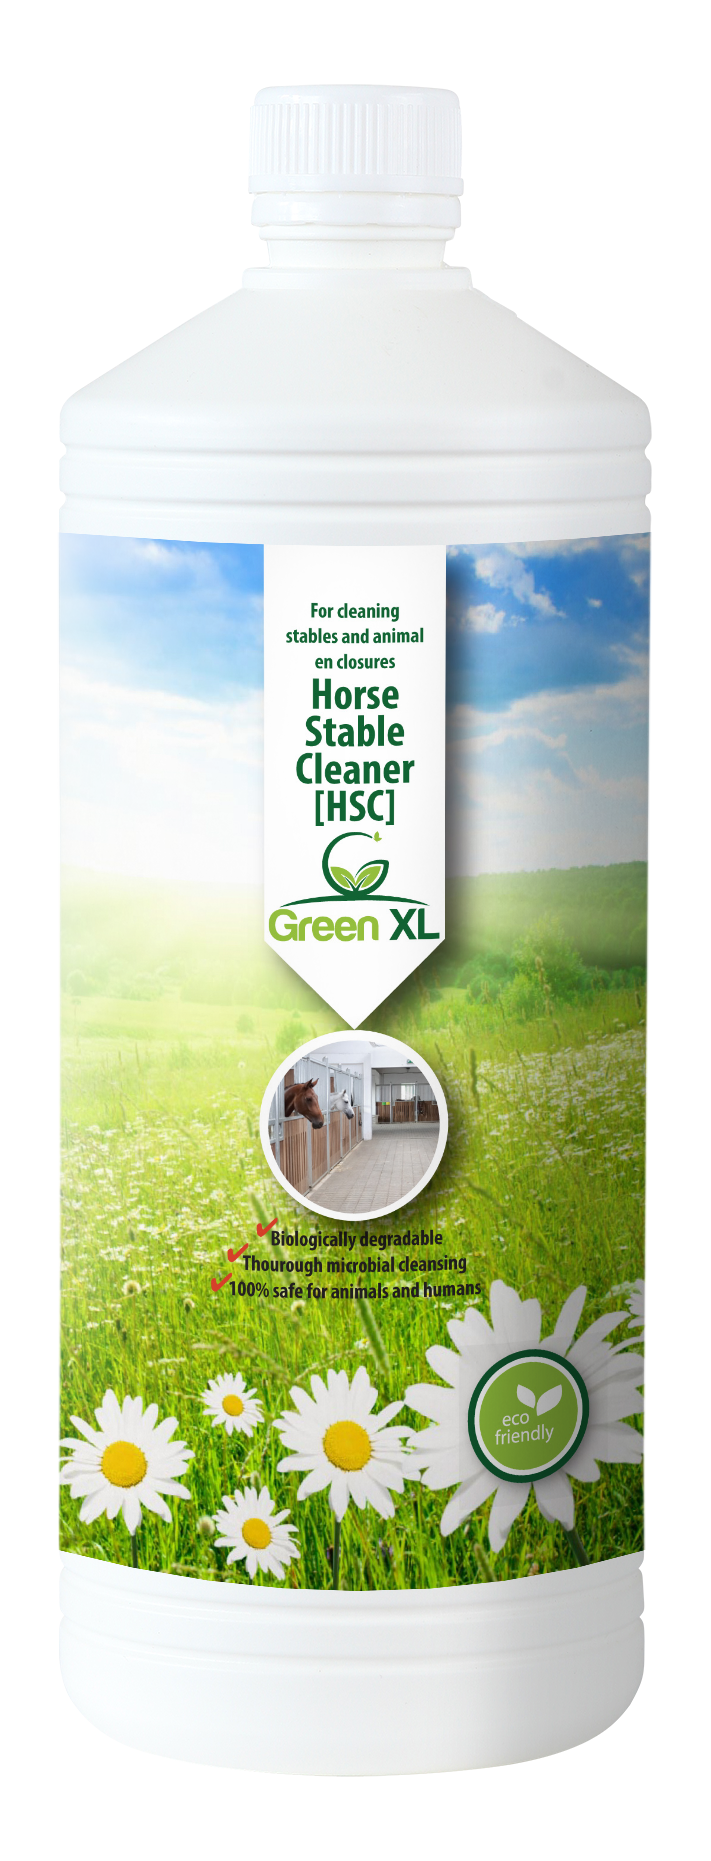 Green-XL Horse Stable Cleaner 1 liter